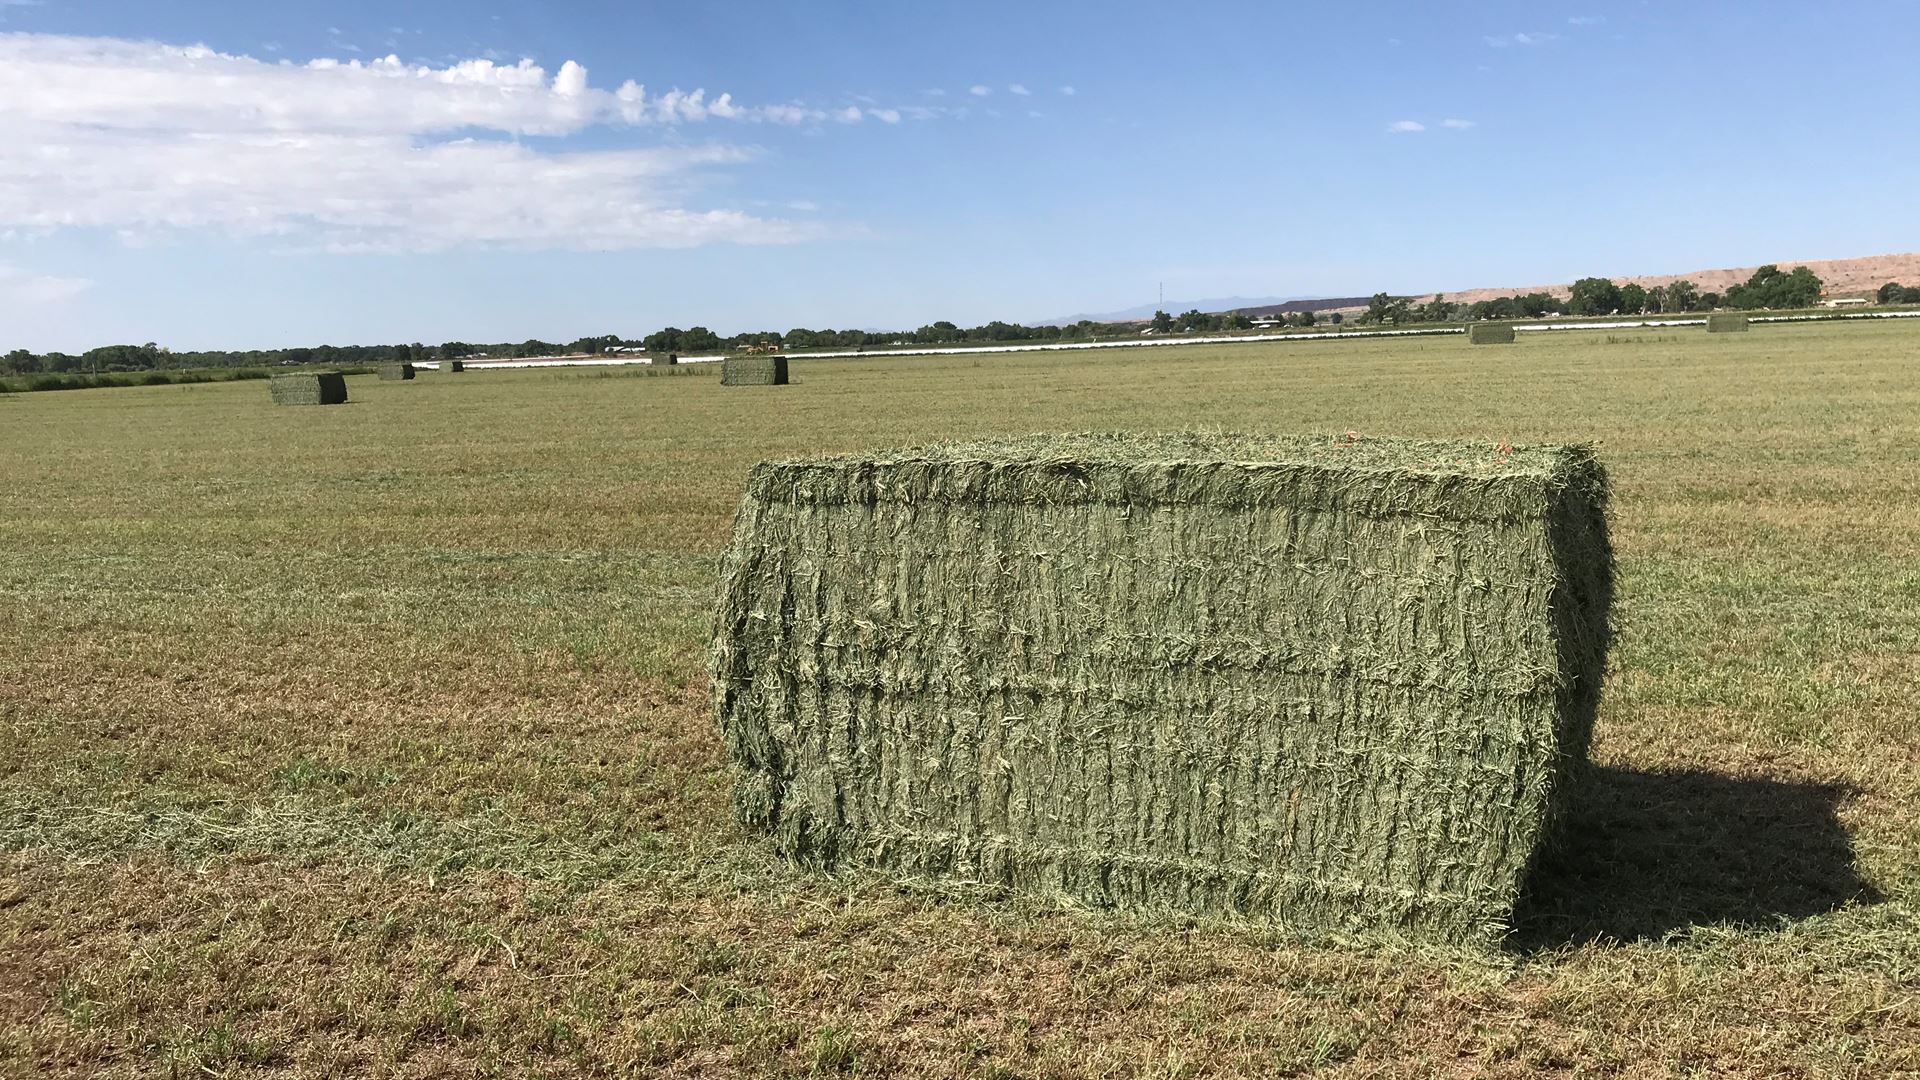 Growers can access vital information at 2022 Southwest Hay & Forage Conference